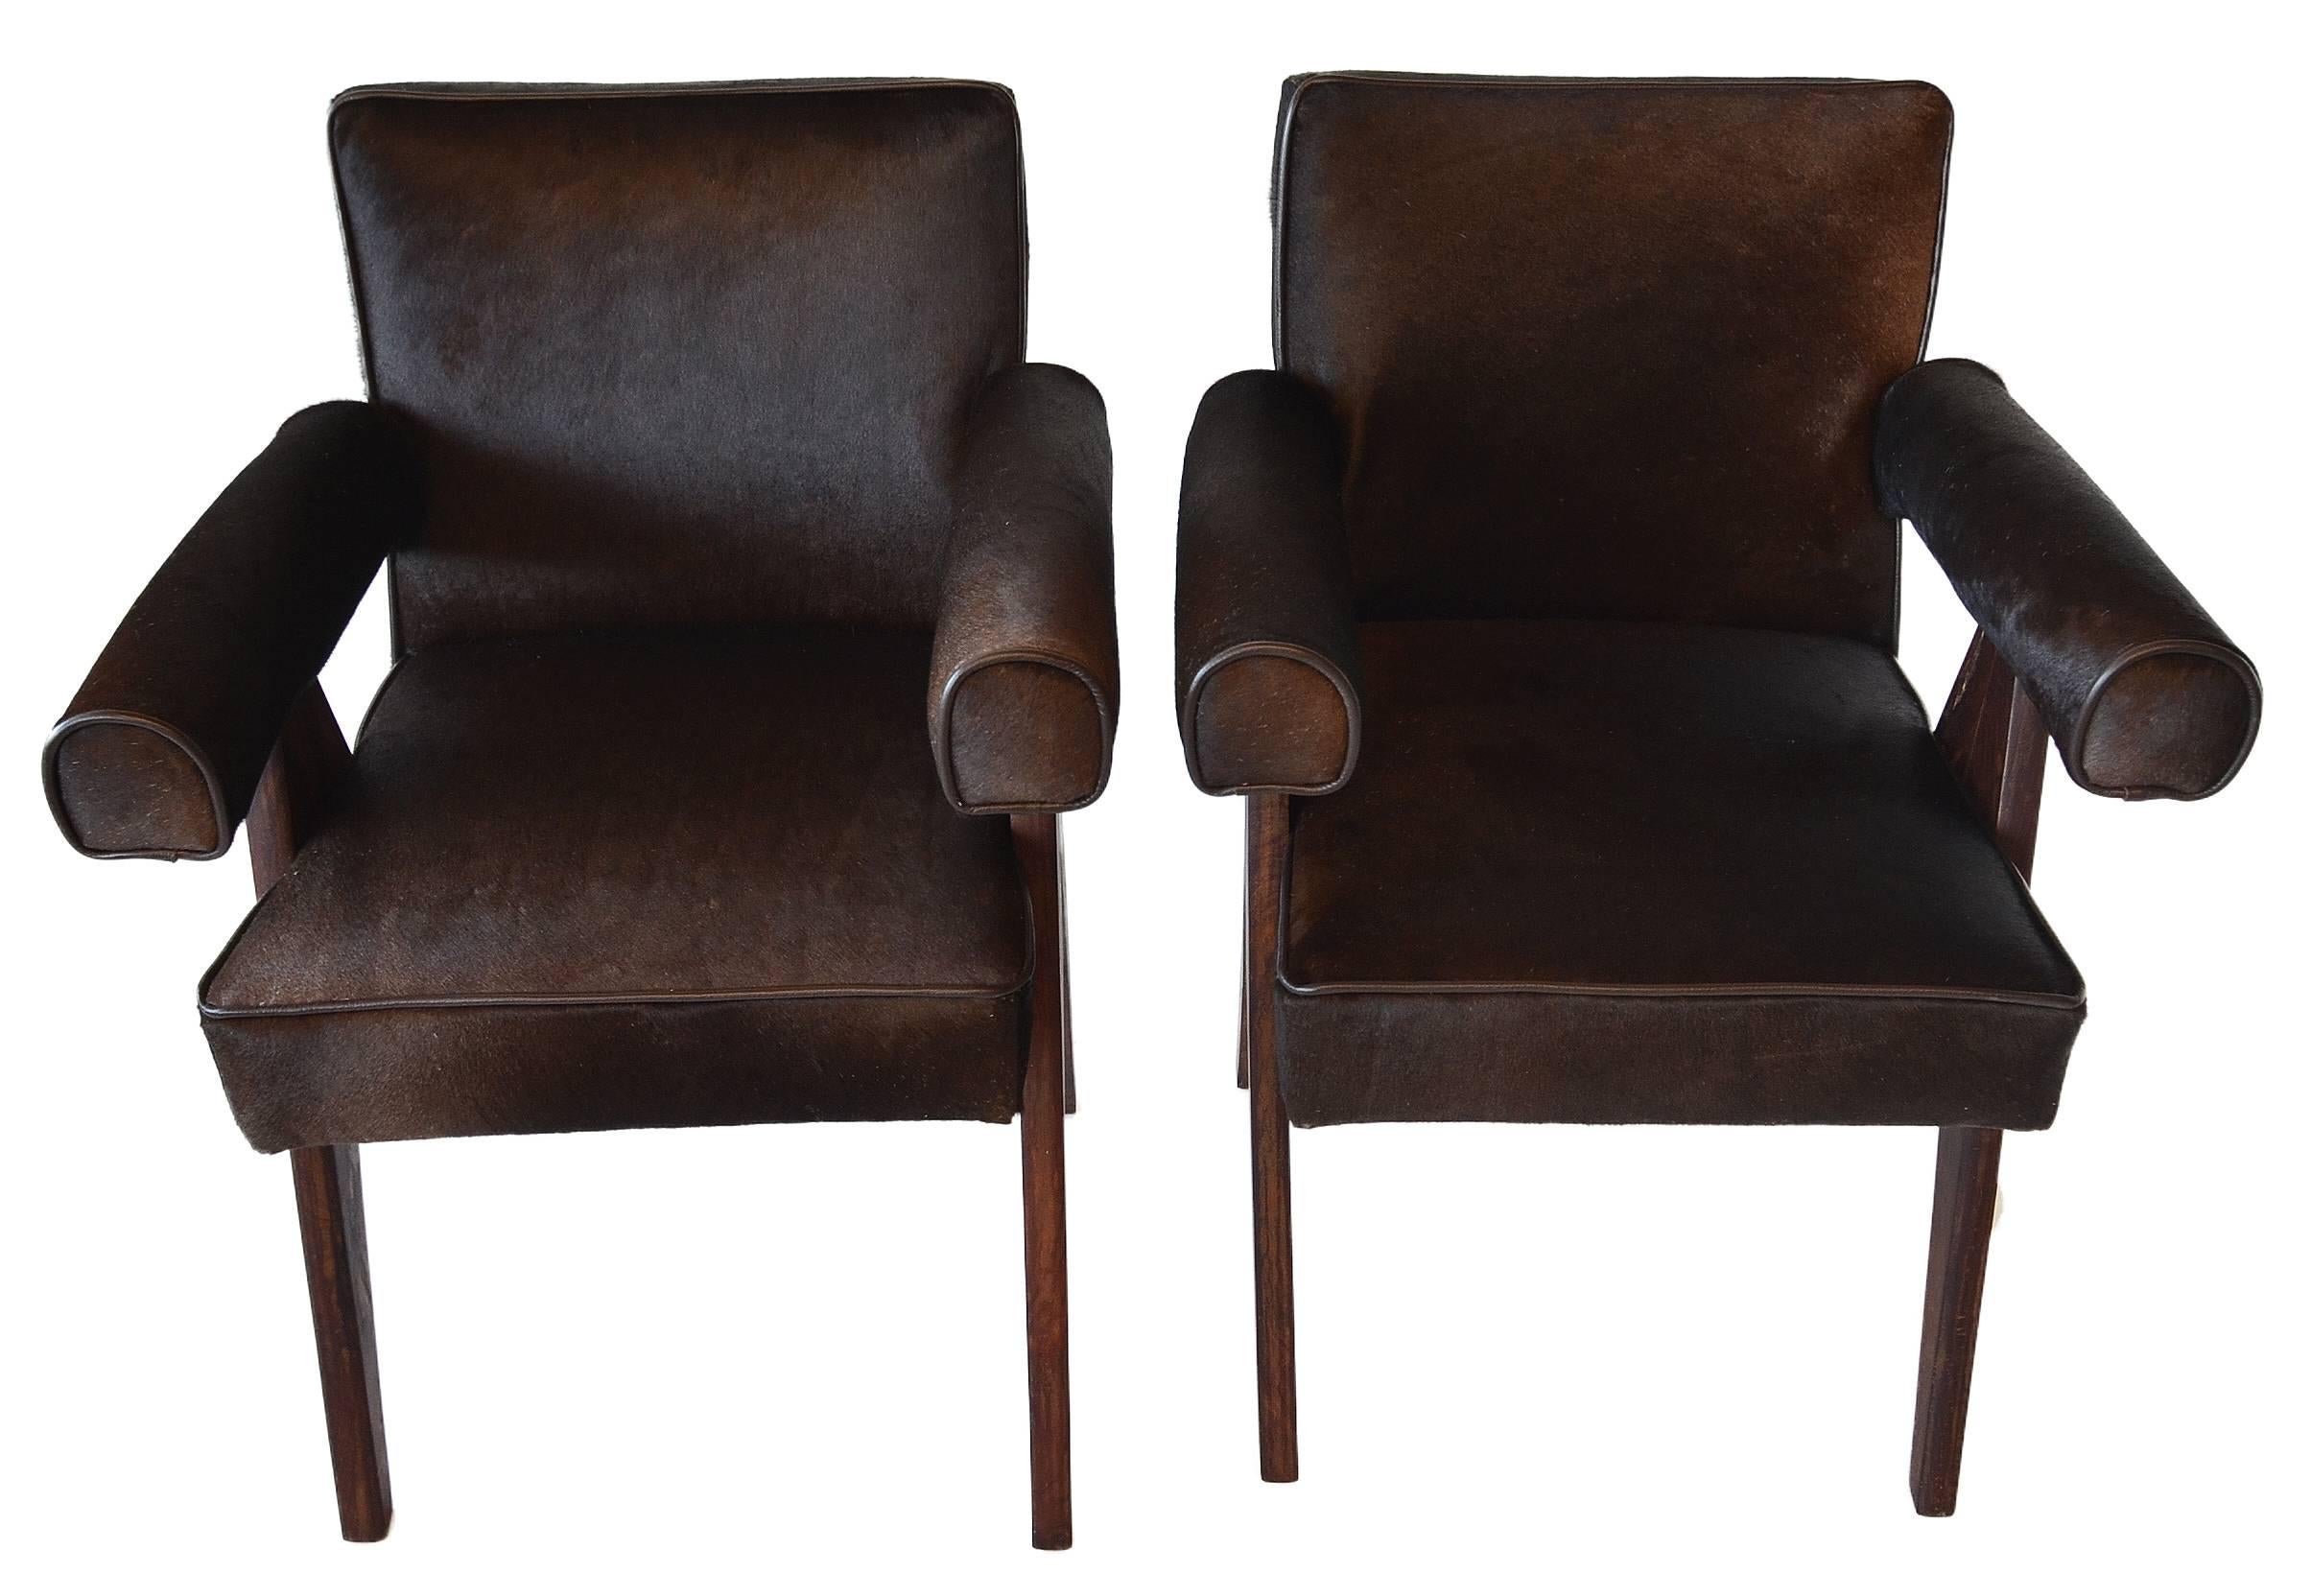 Indian Pair of Pierre Jeanneret Armchairs PJ-SI-30-C in Rosewood and Hide